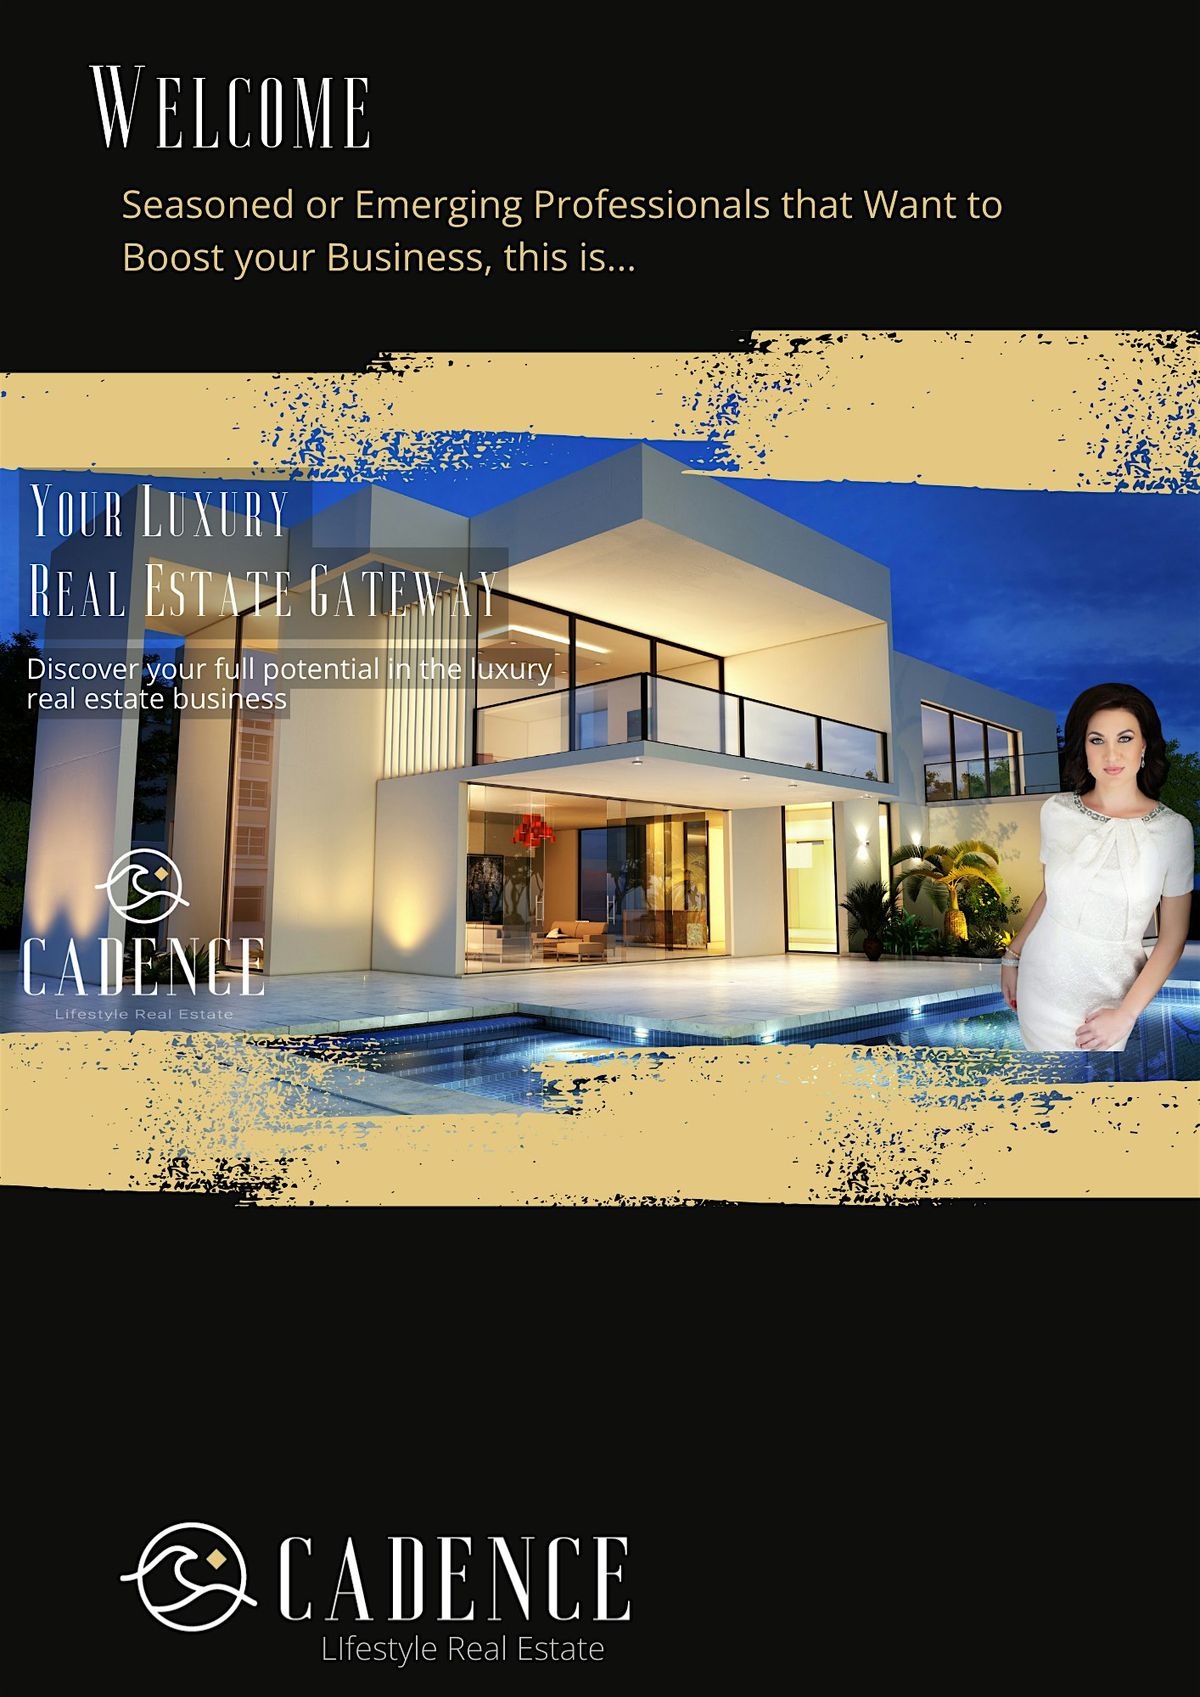 Breaking Into Luxury - Keys to Mastering Your Luxury Listing Photos